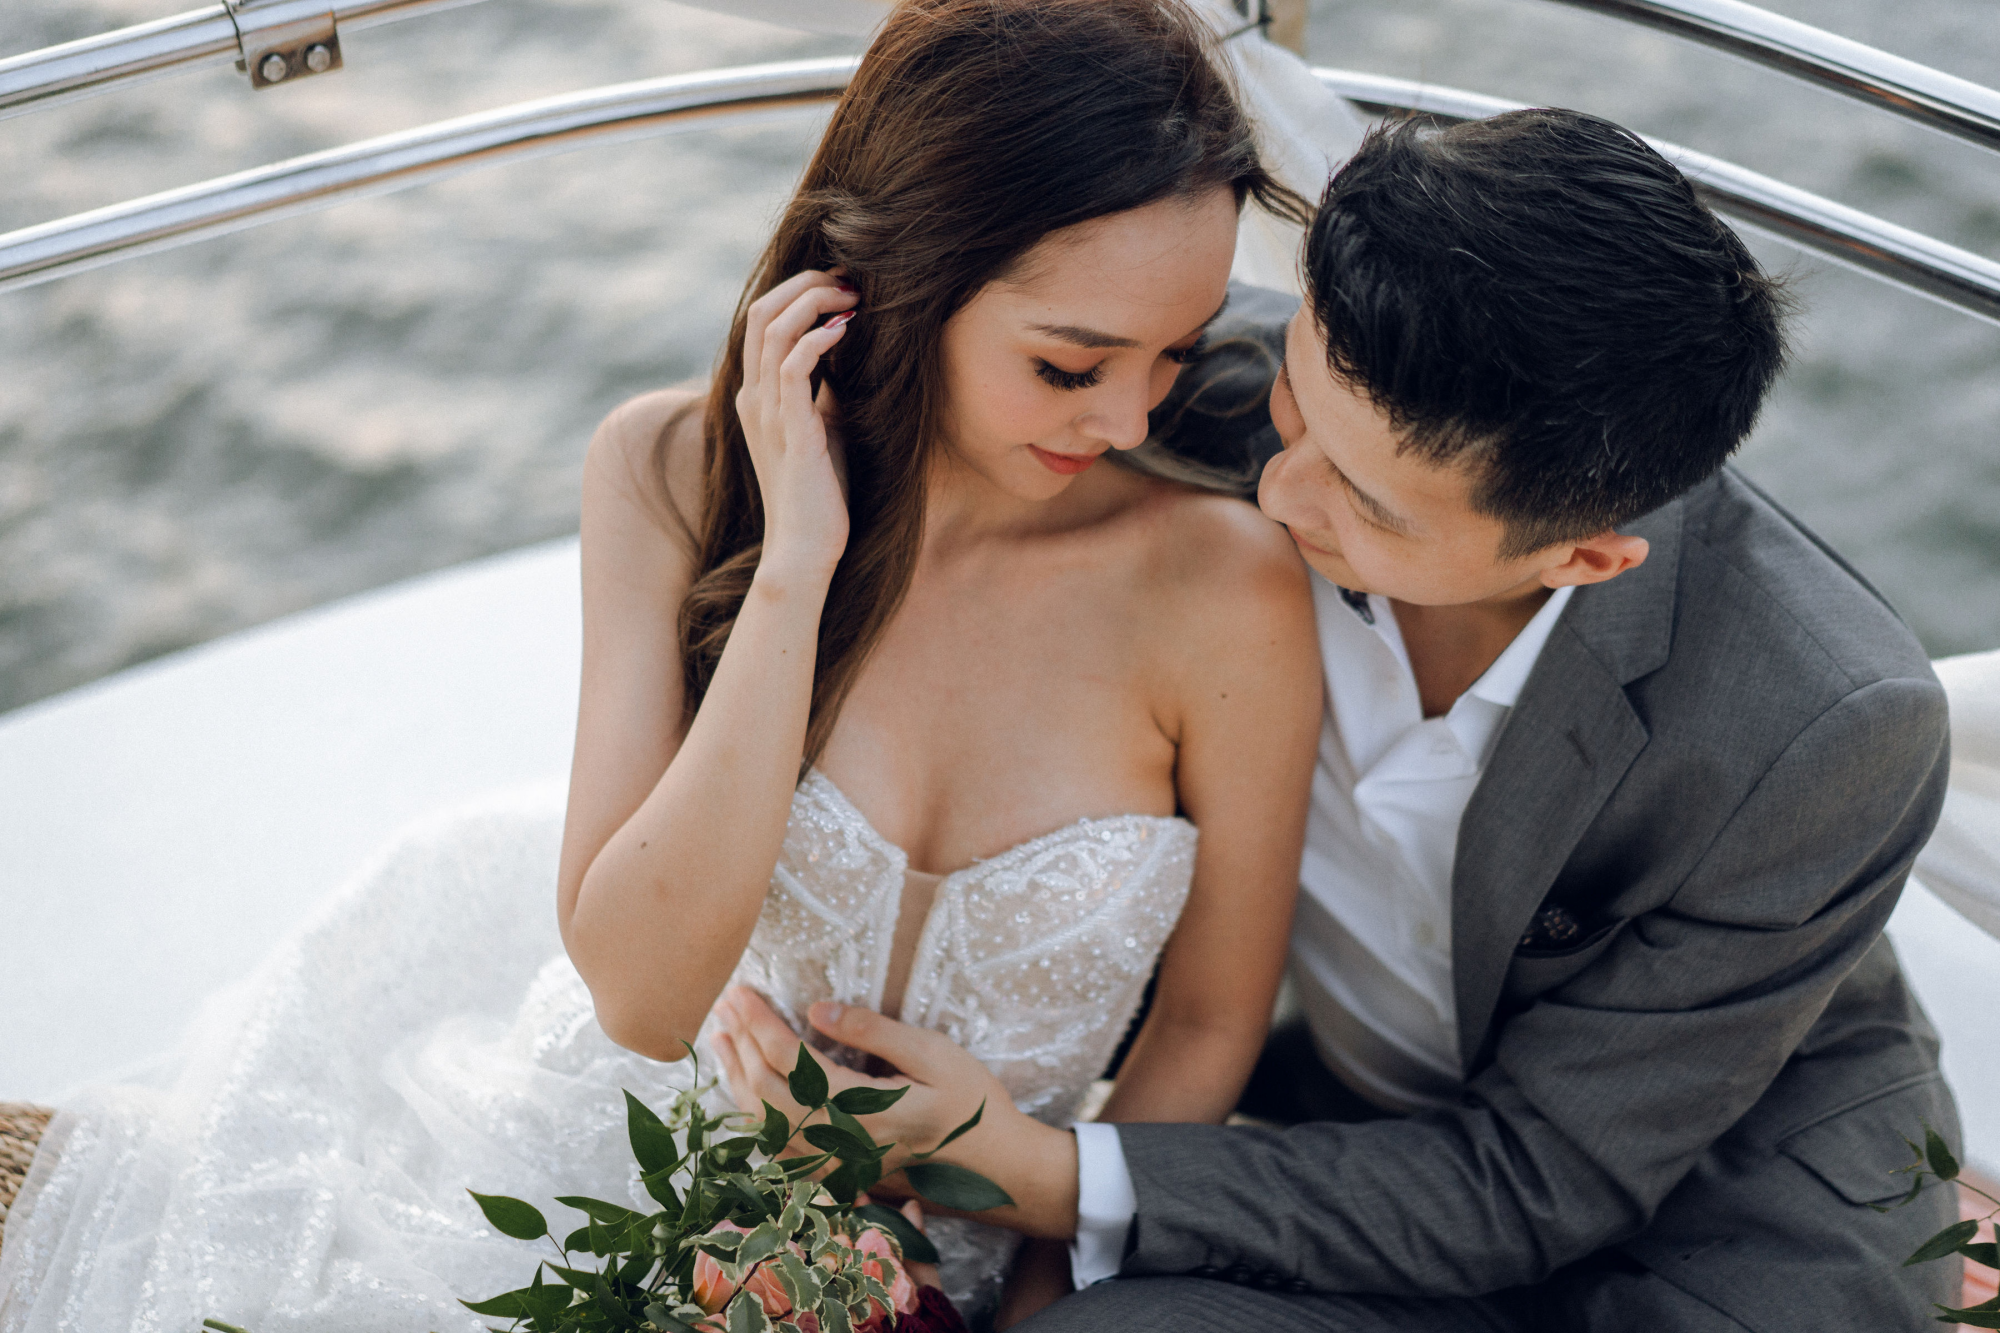 Sunset Prewedding Photoshoot On A Yacht With Romantic Floral Styling by Samantha on OneThreeOneFour 20